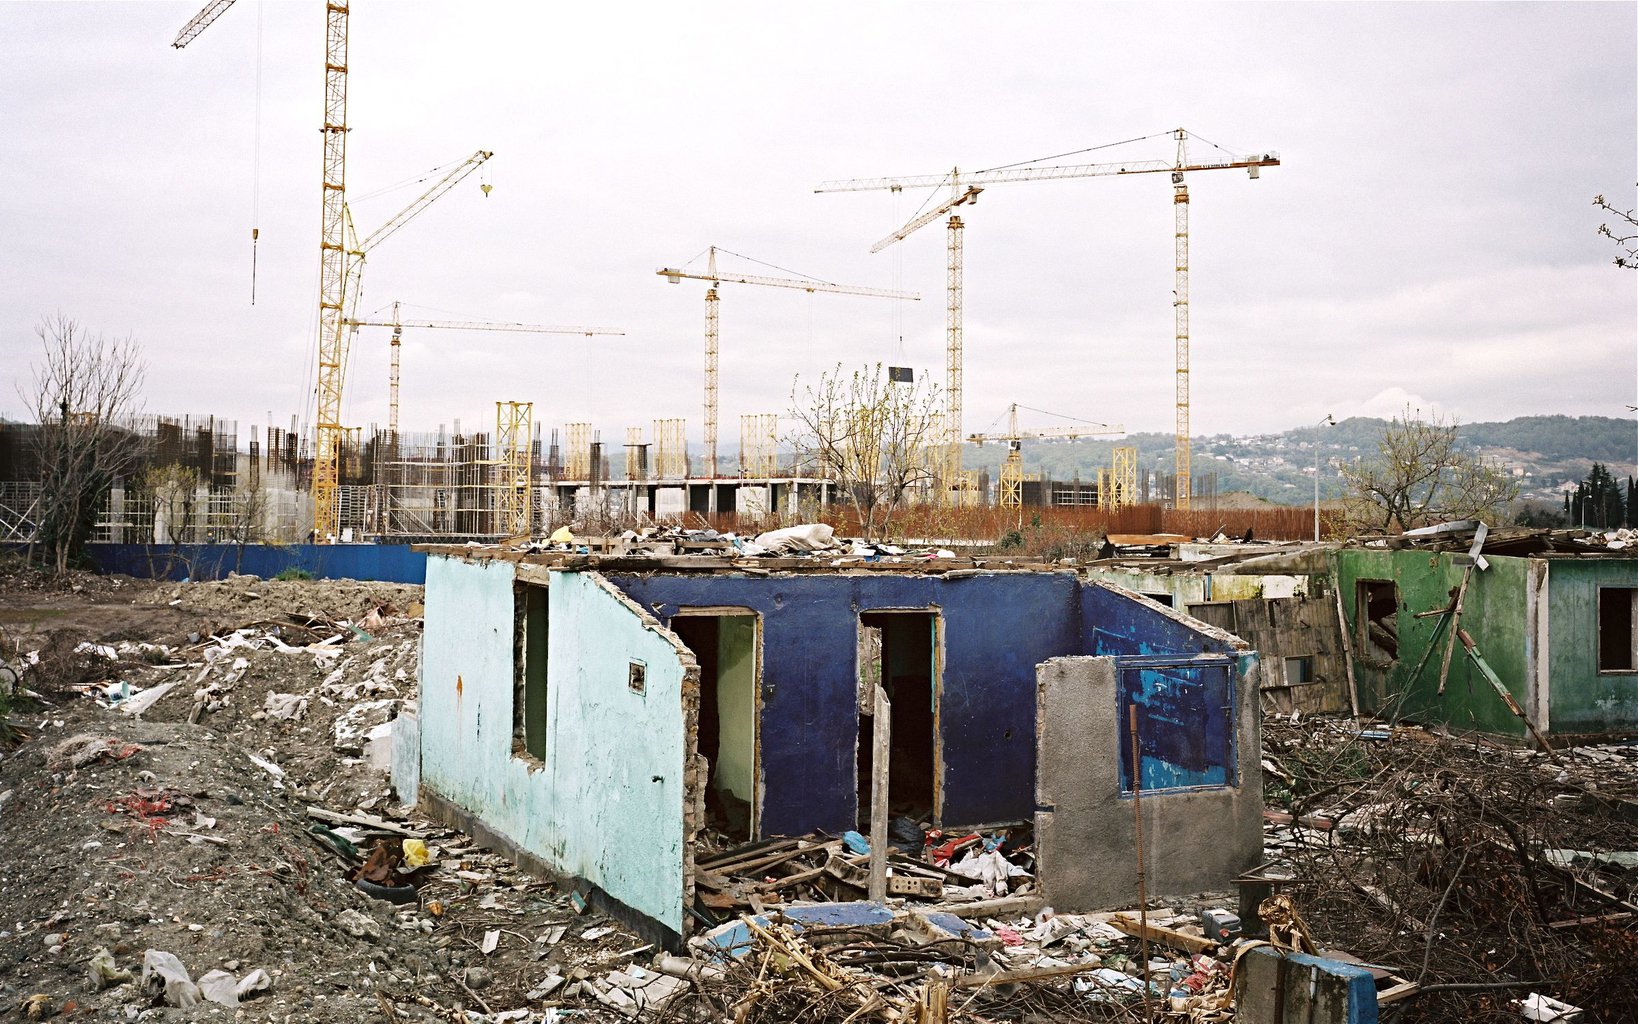 In Sochi, villages were bulldozed to make way for massive complex construction (picture copyright Rob Hornstra)